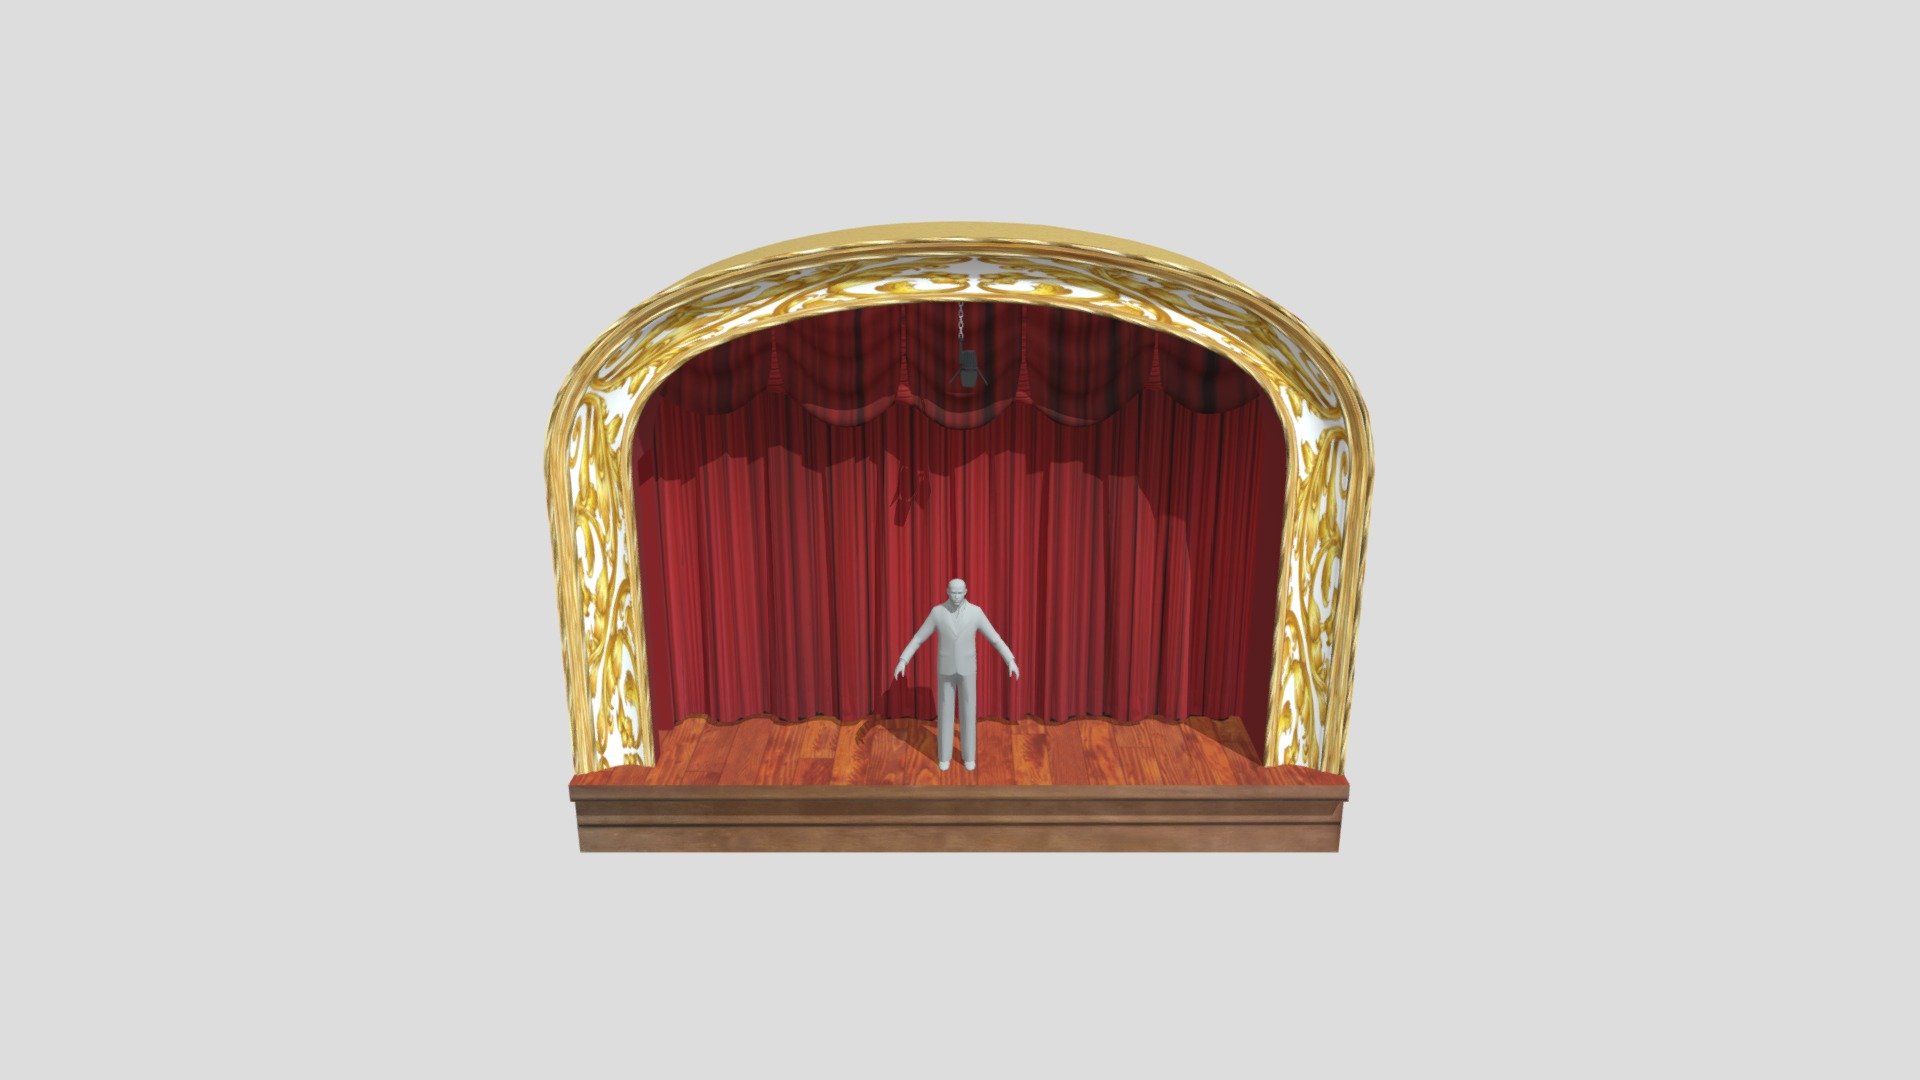 Theater stage with curtain in arc.

Polygons: 21168
Vertices: 15540

Including formats: blend, fbx, obj - Curtain theater scenery - 3D model by arpoint 3d model